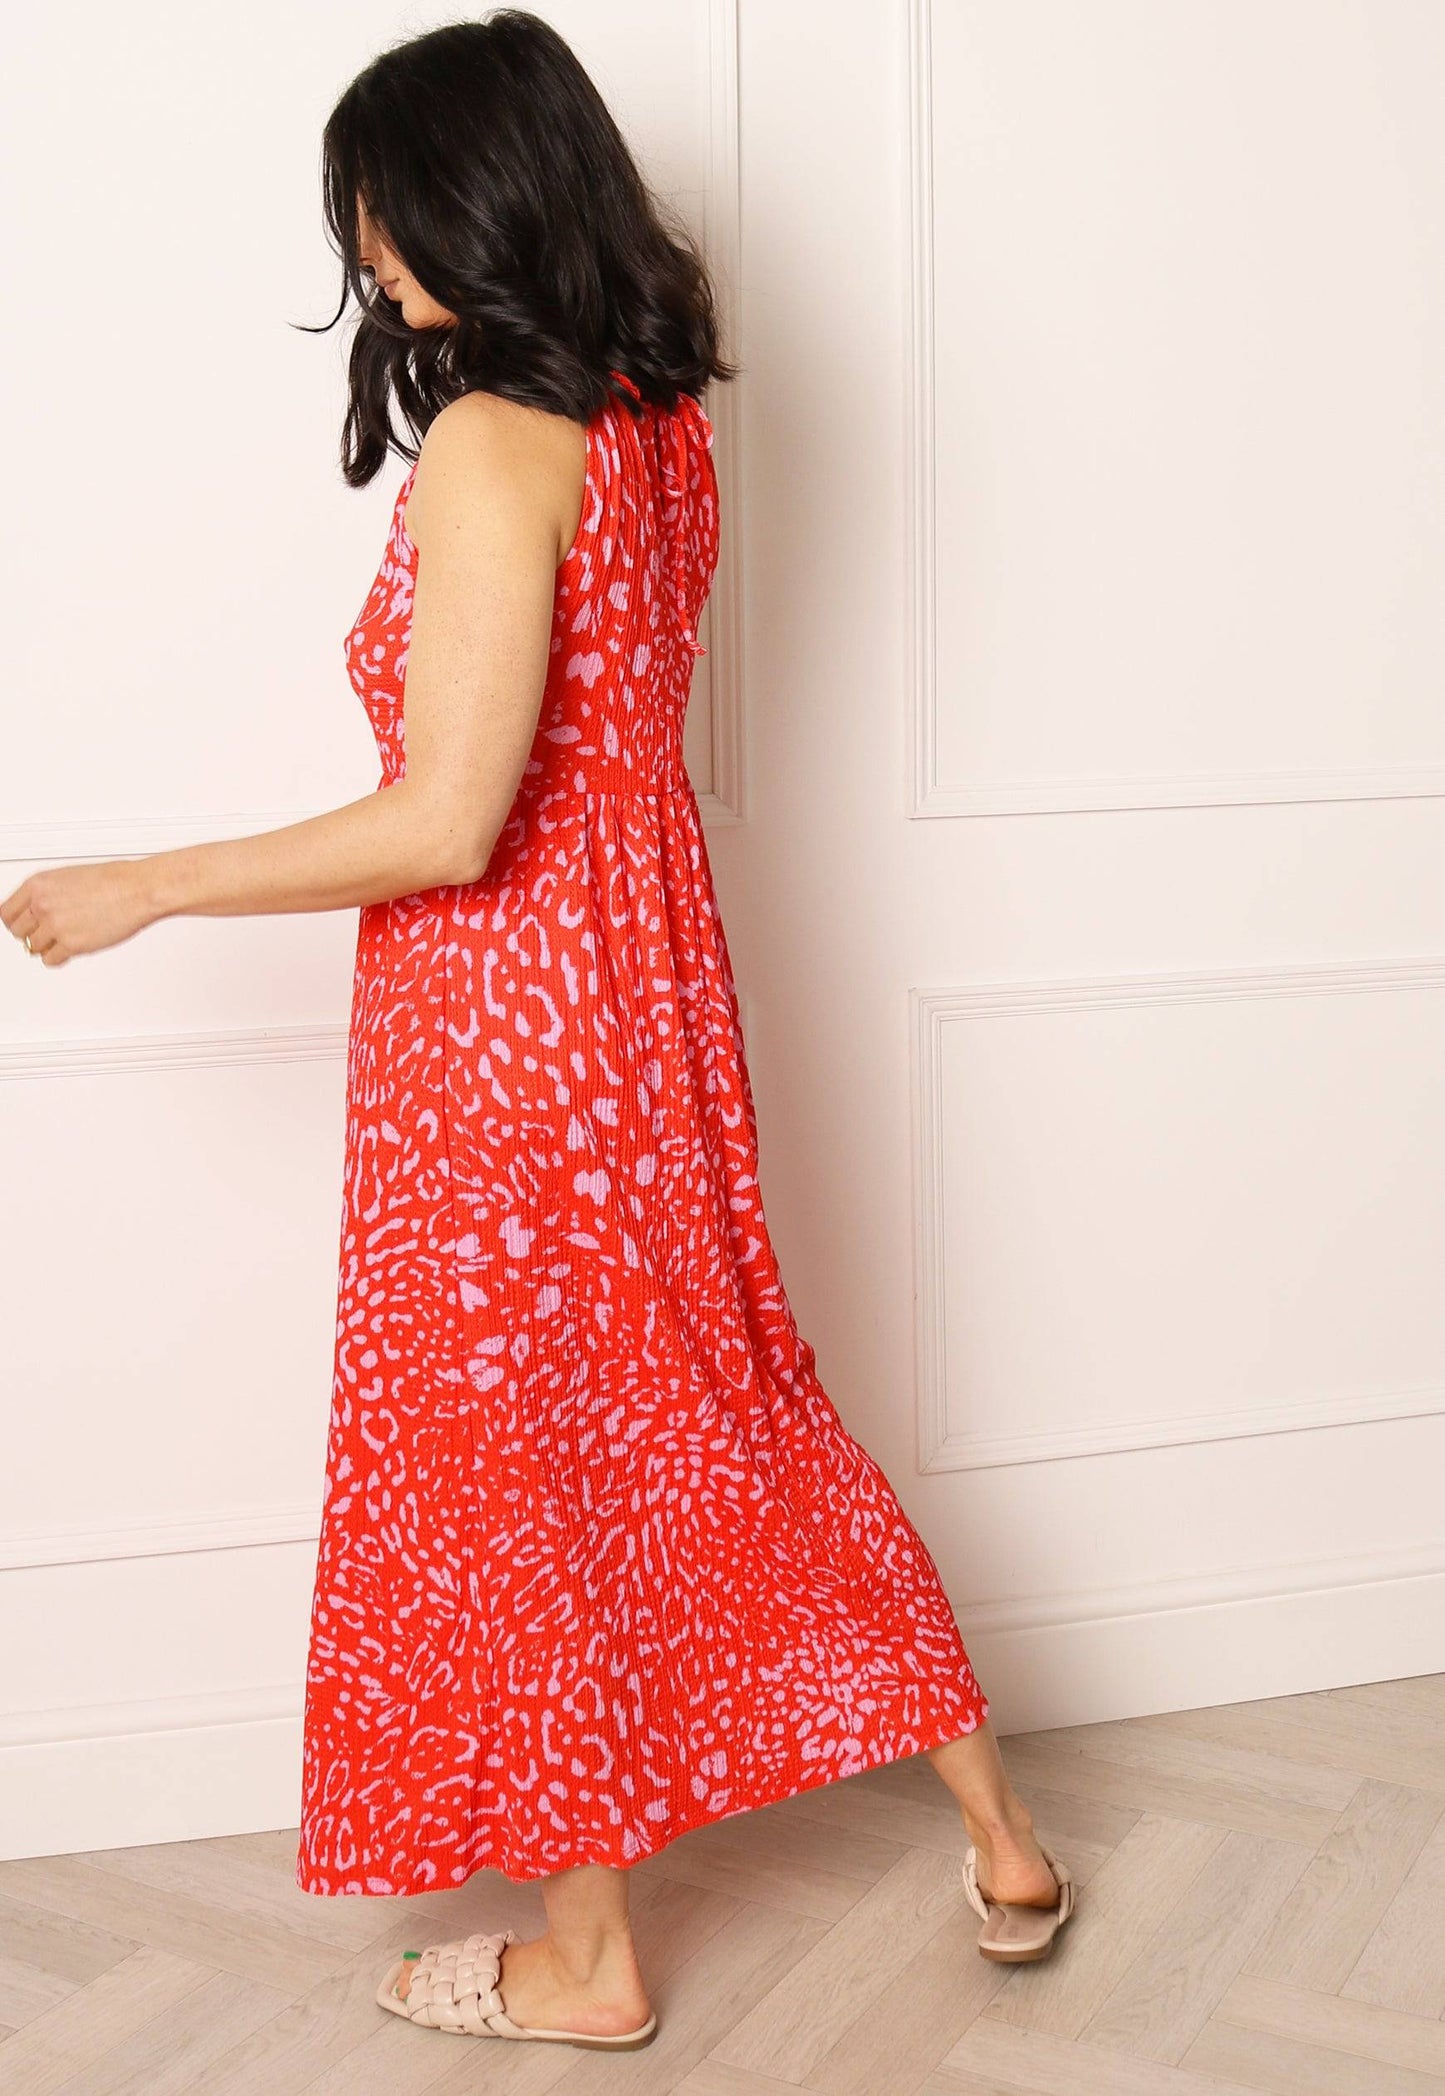 
                  
                    VERO MODA Loa Leopard Print Halter Neck Beachy Maxi Dress in Red & Pink - One Nation Clothing
                  
                